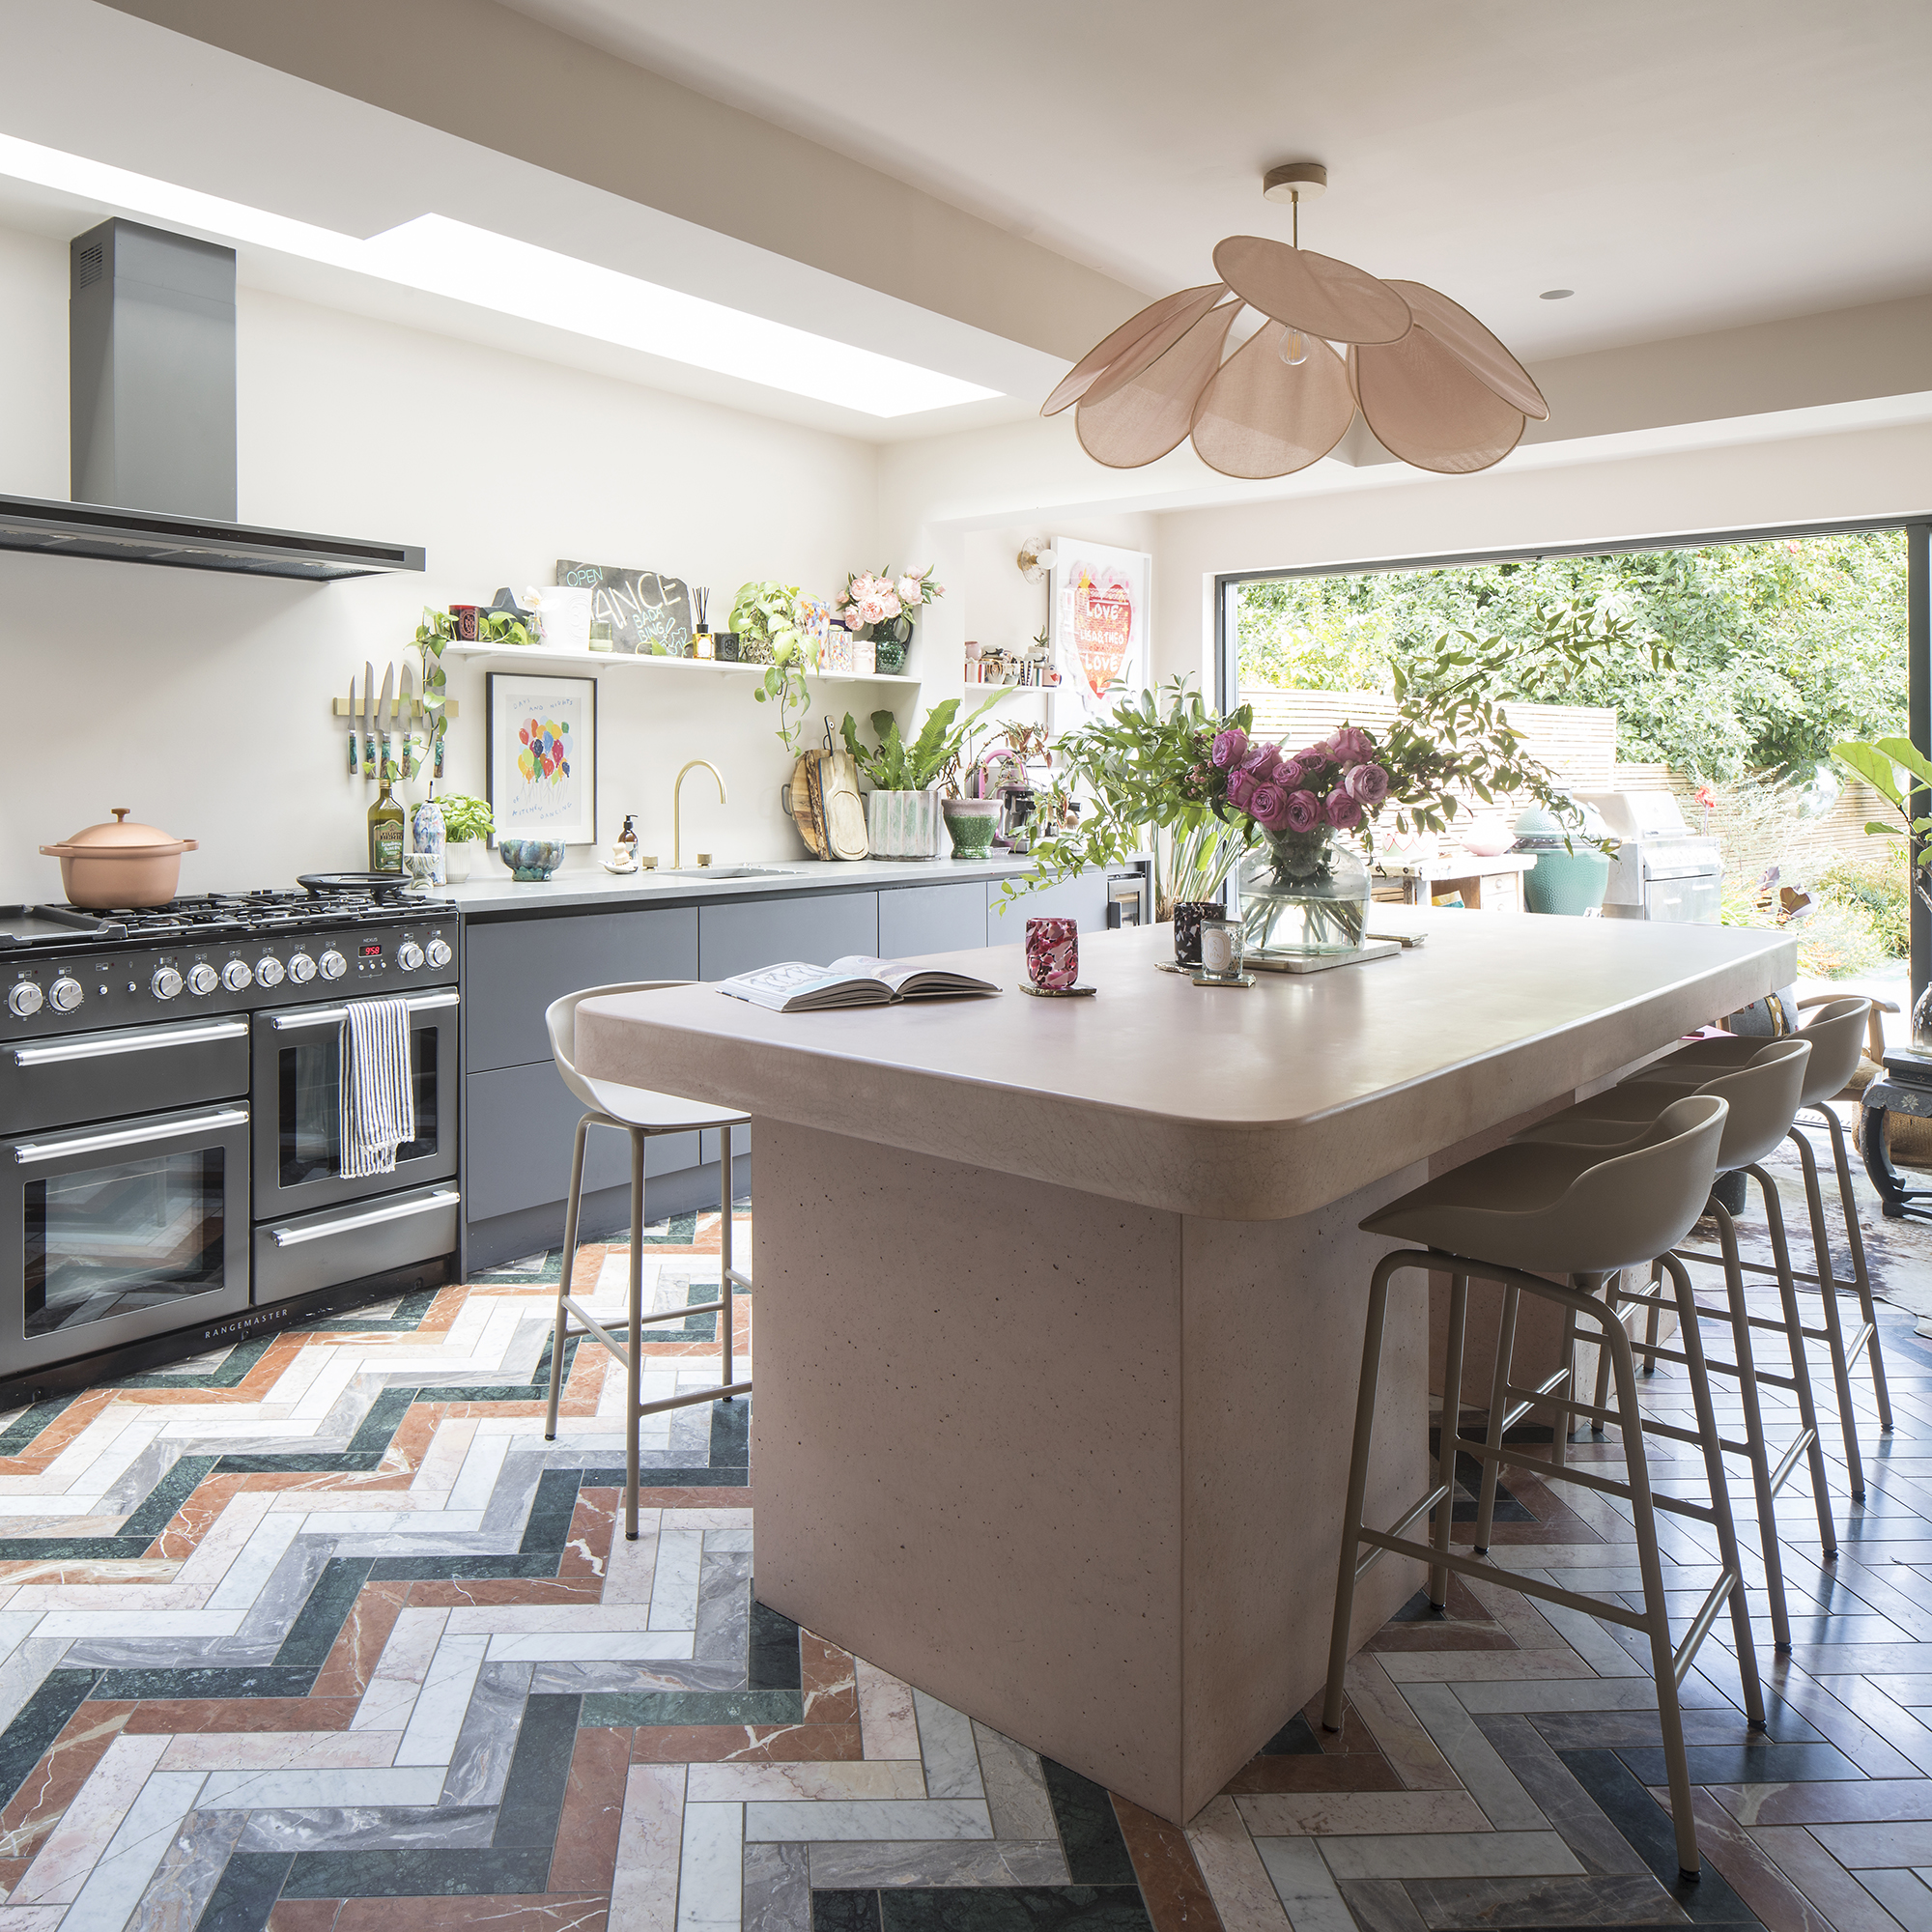 Kitchen with pink island and colourful chevron flooring